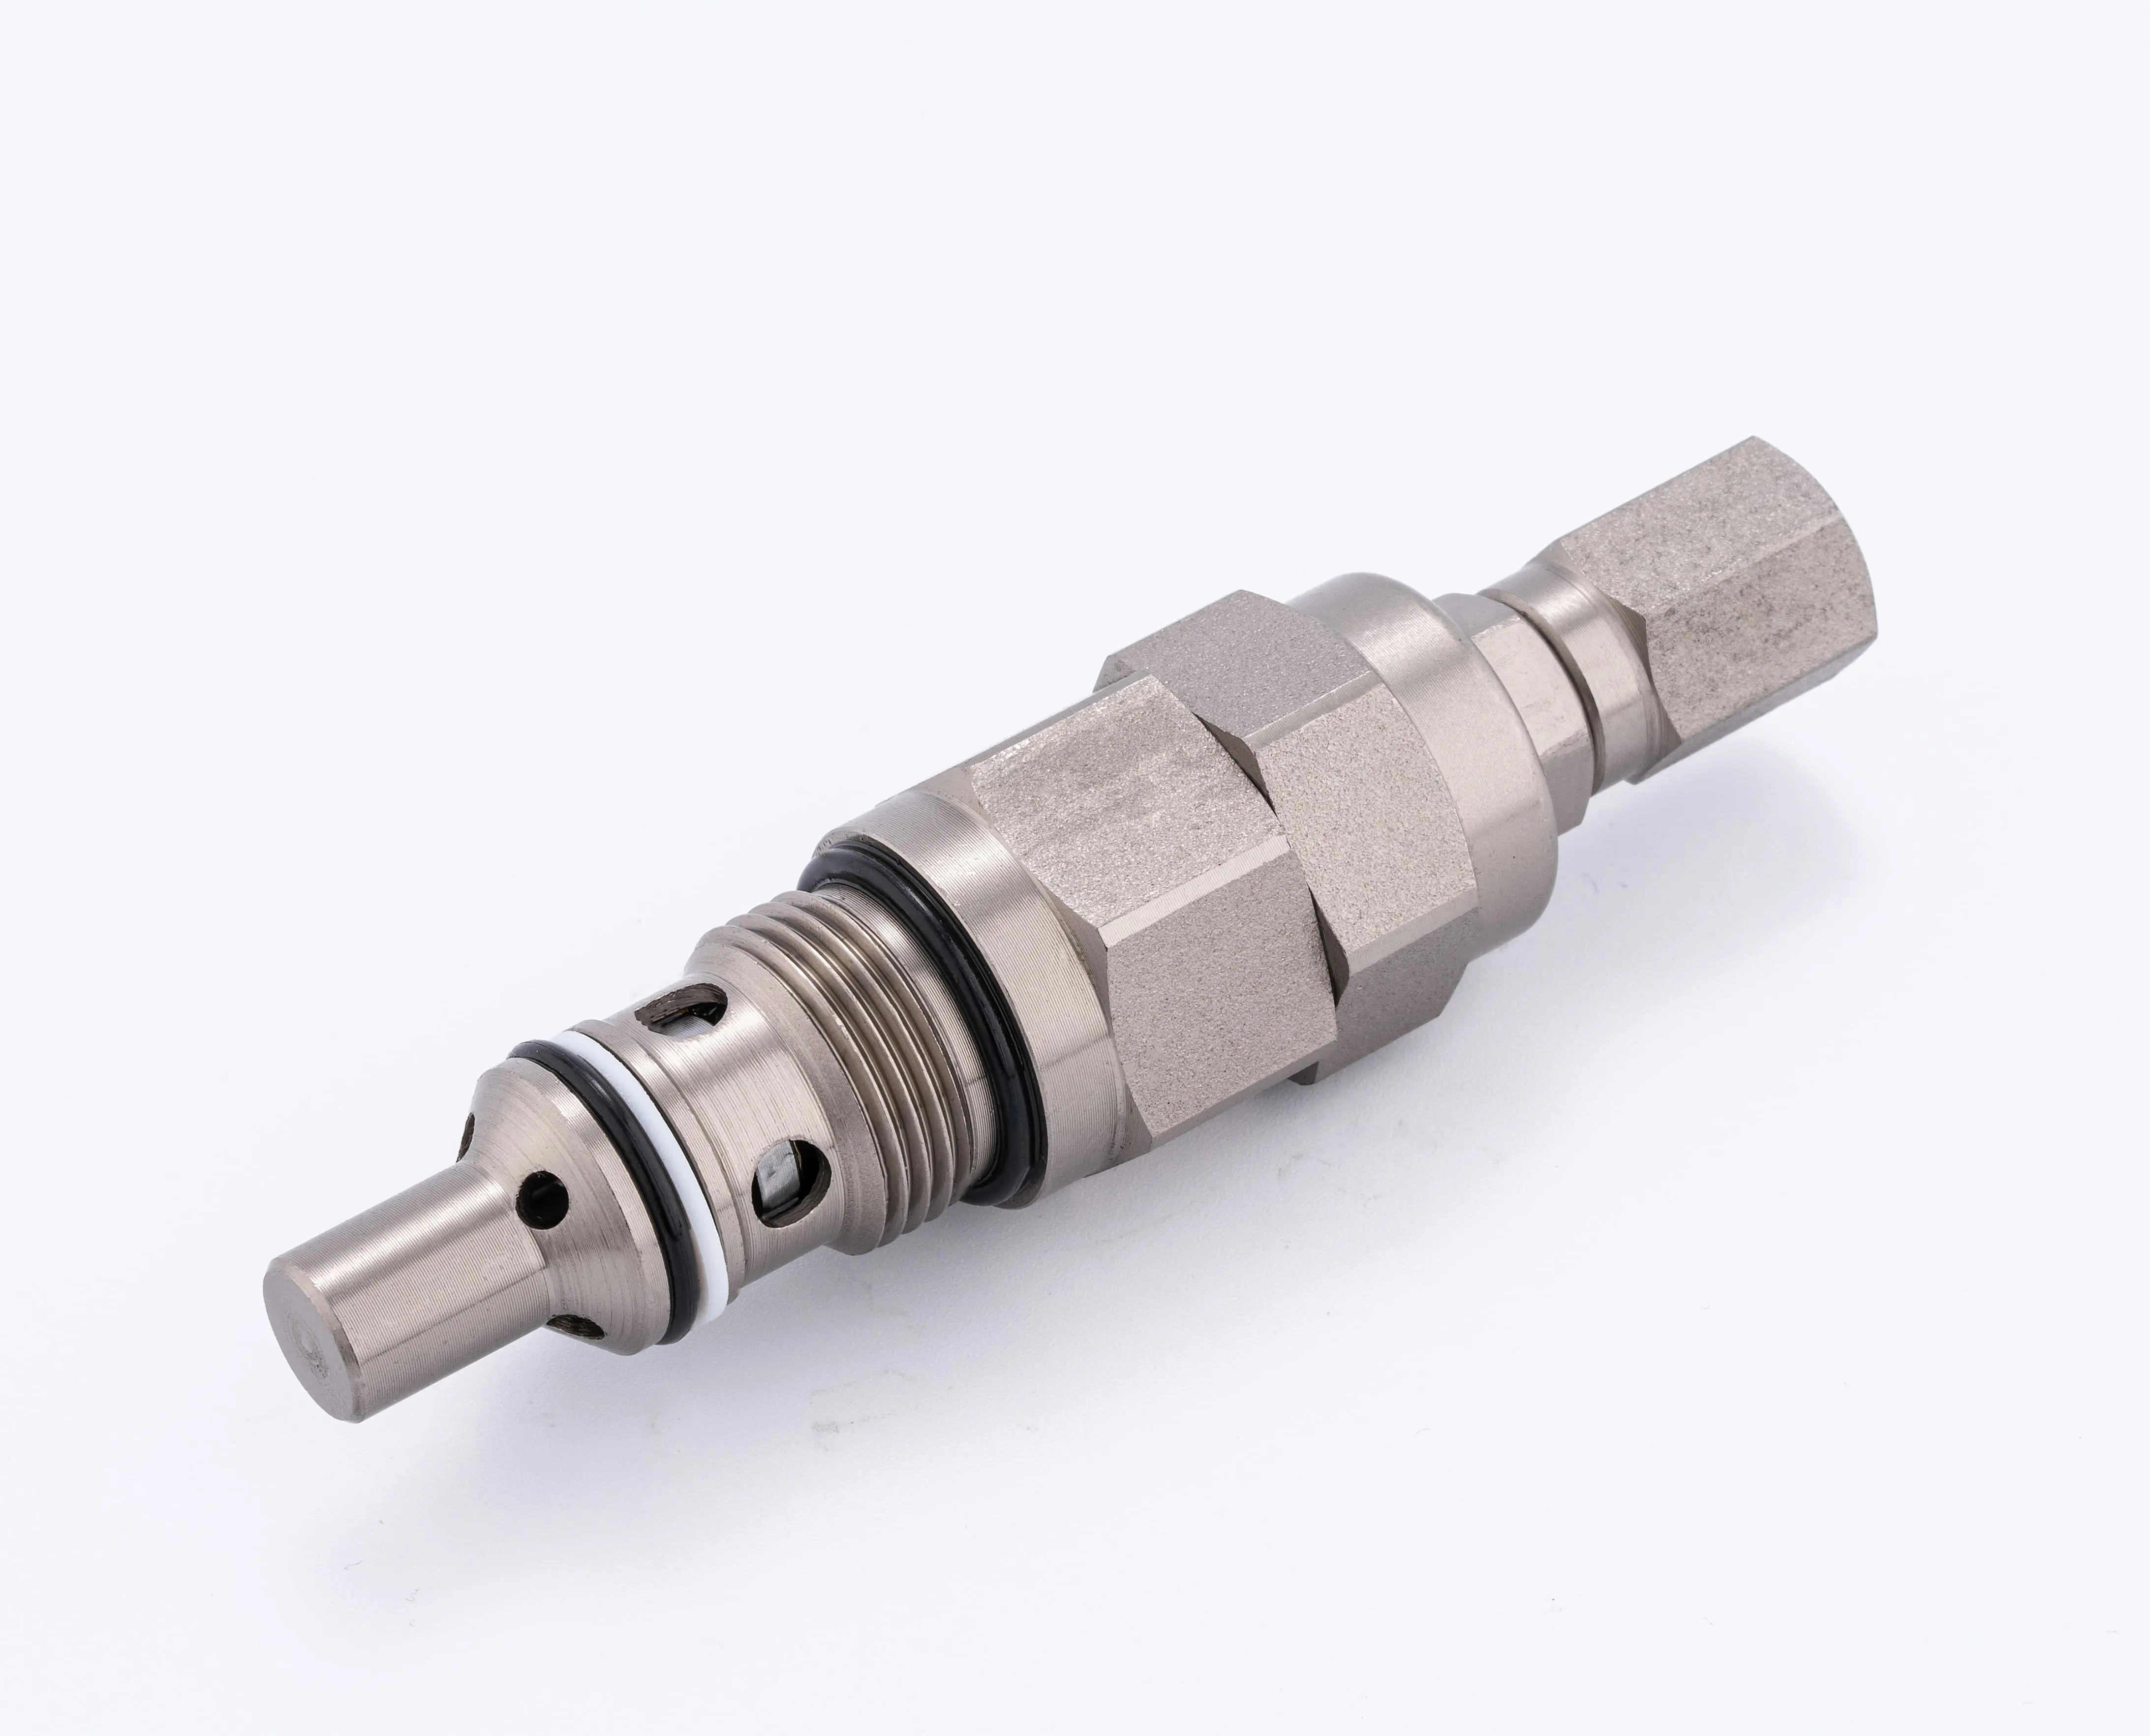 Direct Source Supply: Precision Flow-Regulating Hydraulic Cartridge Valve for Automation